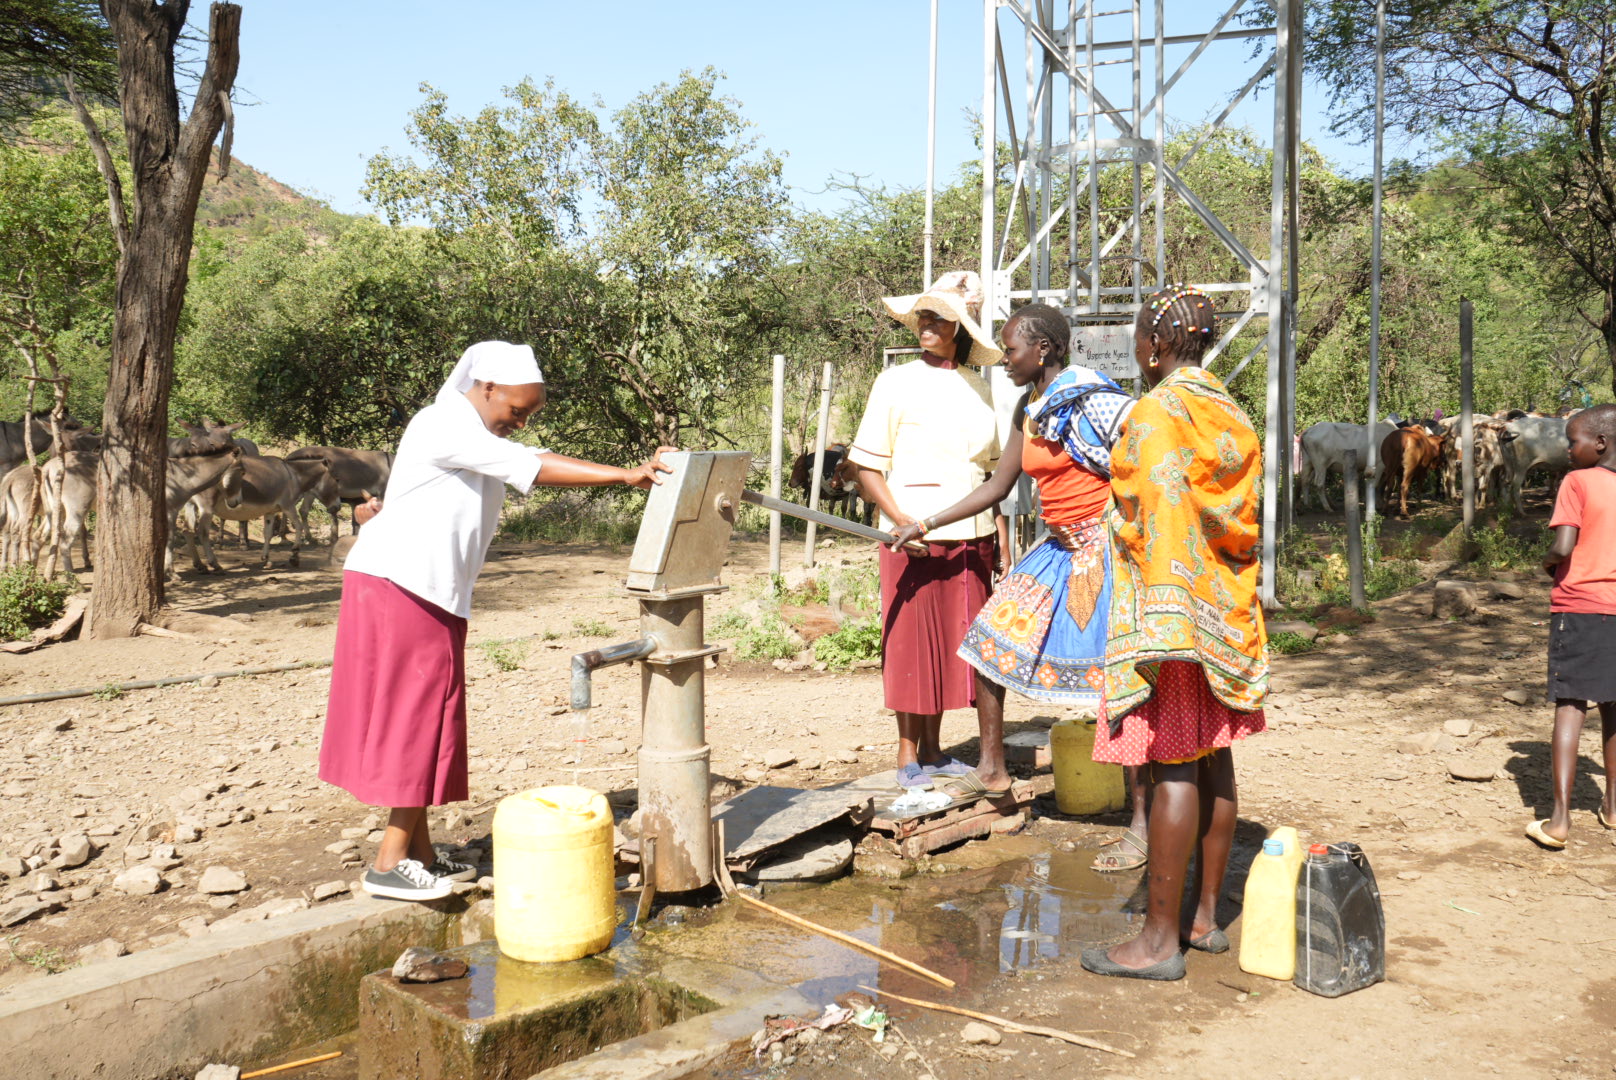 Srs. Aquilina Munyao and Jannifer Hiuhu inspect a borehole that the church drilled for the Rotu village. The community protects and maintains the borehole, the only water source for families and their flocks. The congregation is advocating for more water sources, which would allow the nomadic Pokot people to settle in villages and inspire urbanization in these rural communities. (GSR photo/Wycliff Peter Oundo)